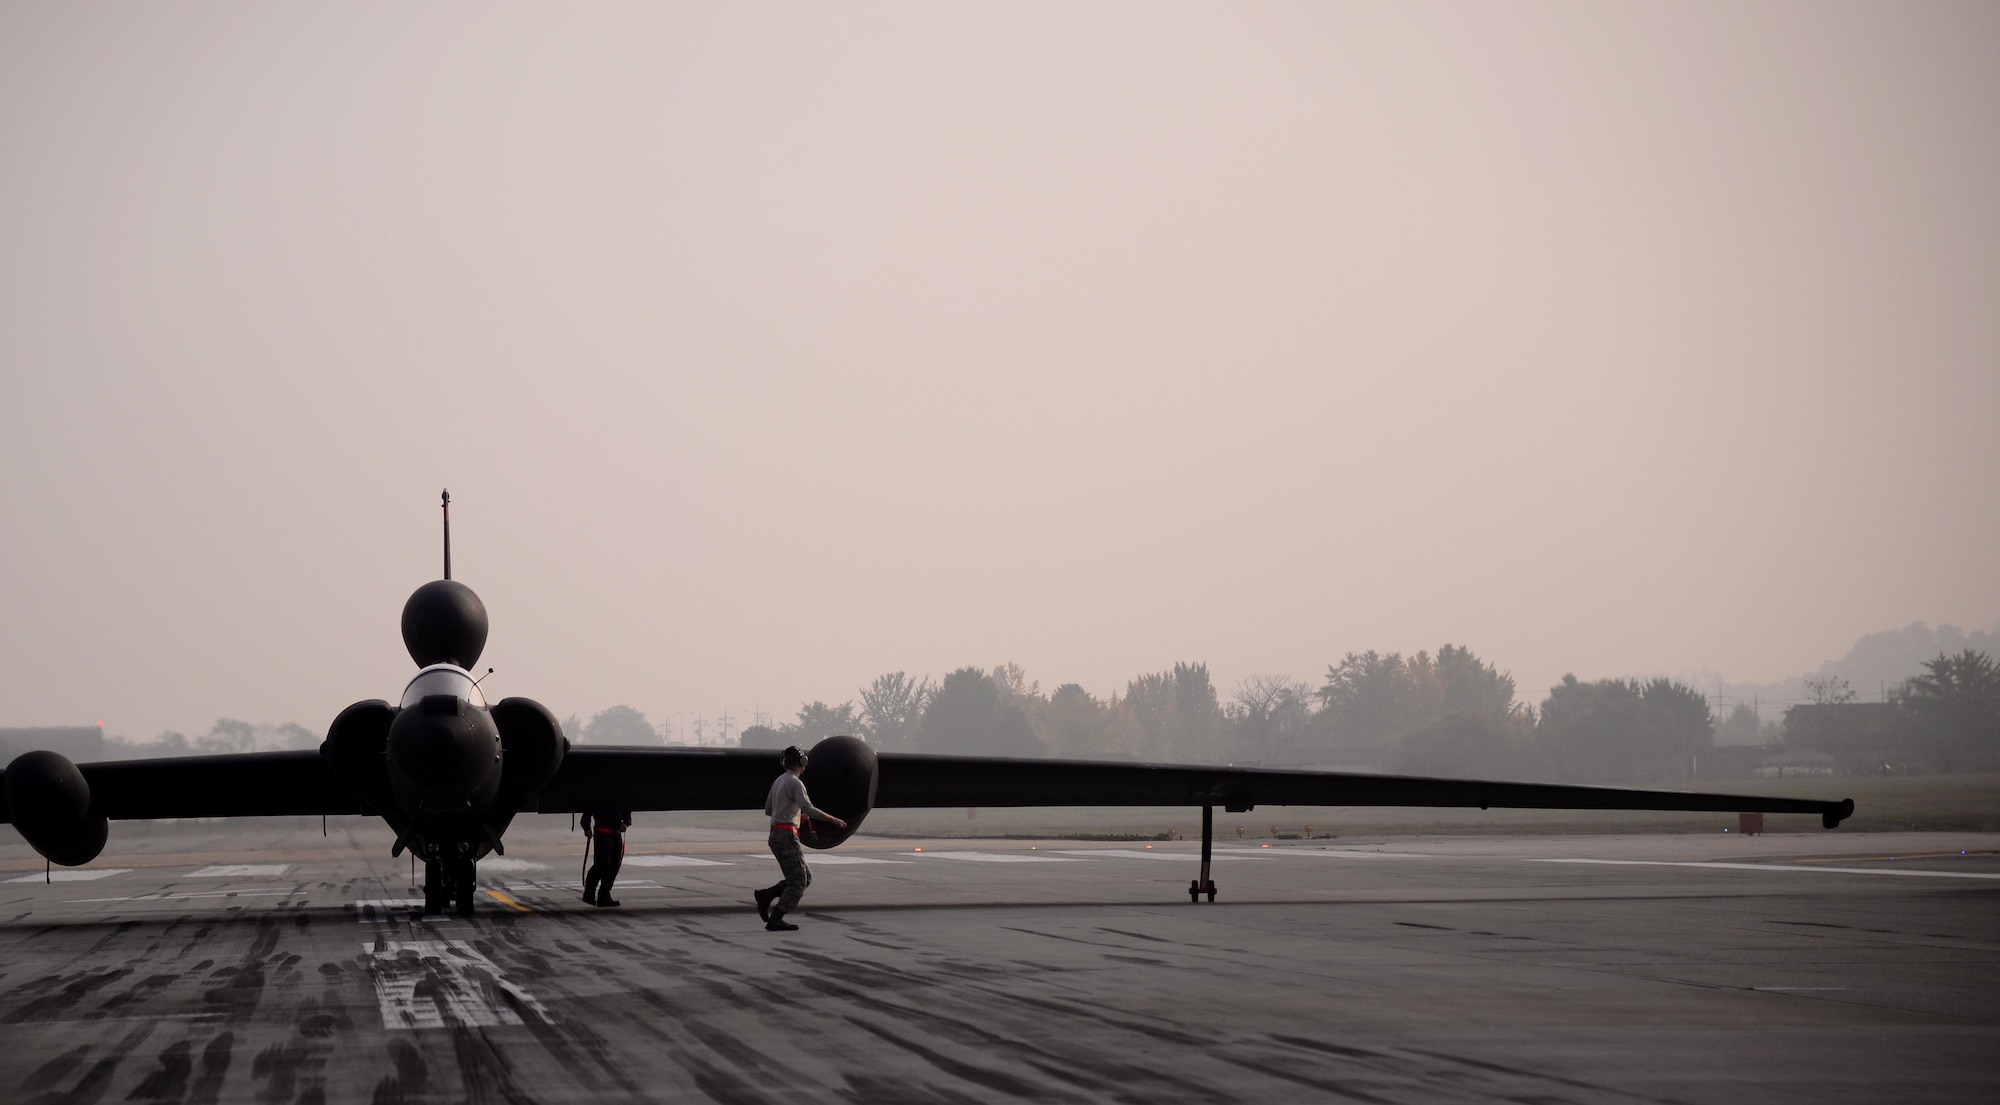 Airmen assigned to the 5th Reconnaissance Squadron perform last-minute checks on a U-2 Dragon Lady before it takes off Oct. 23, 2015, at Osan Air Base, South Korea. The U-2 Dragon Lady is an important part of the Air Force’s intelligence, surveillance and reconnaissance (ISR) mission enterprise, and provides high-altitude, all-weather surveillance and reconnaissance in direct support of U.S. and allied forces. (U.S. Air Force photo/Staff Sgt. Benjamin Sutton) 